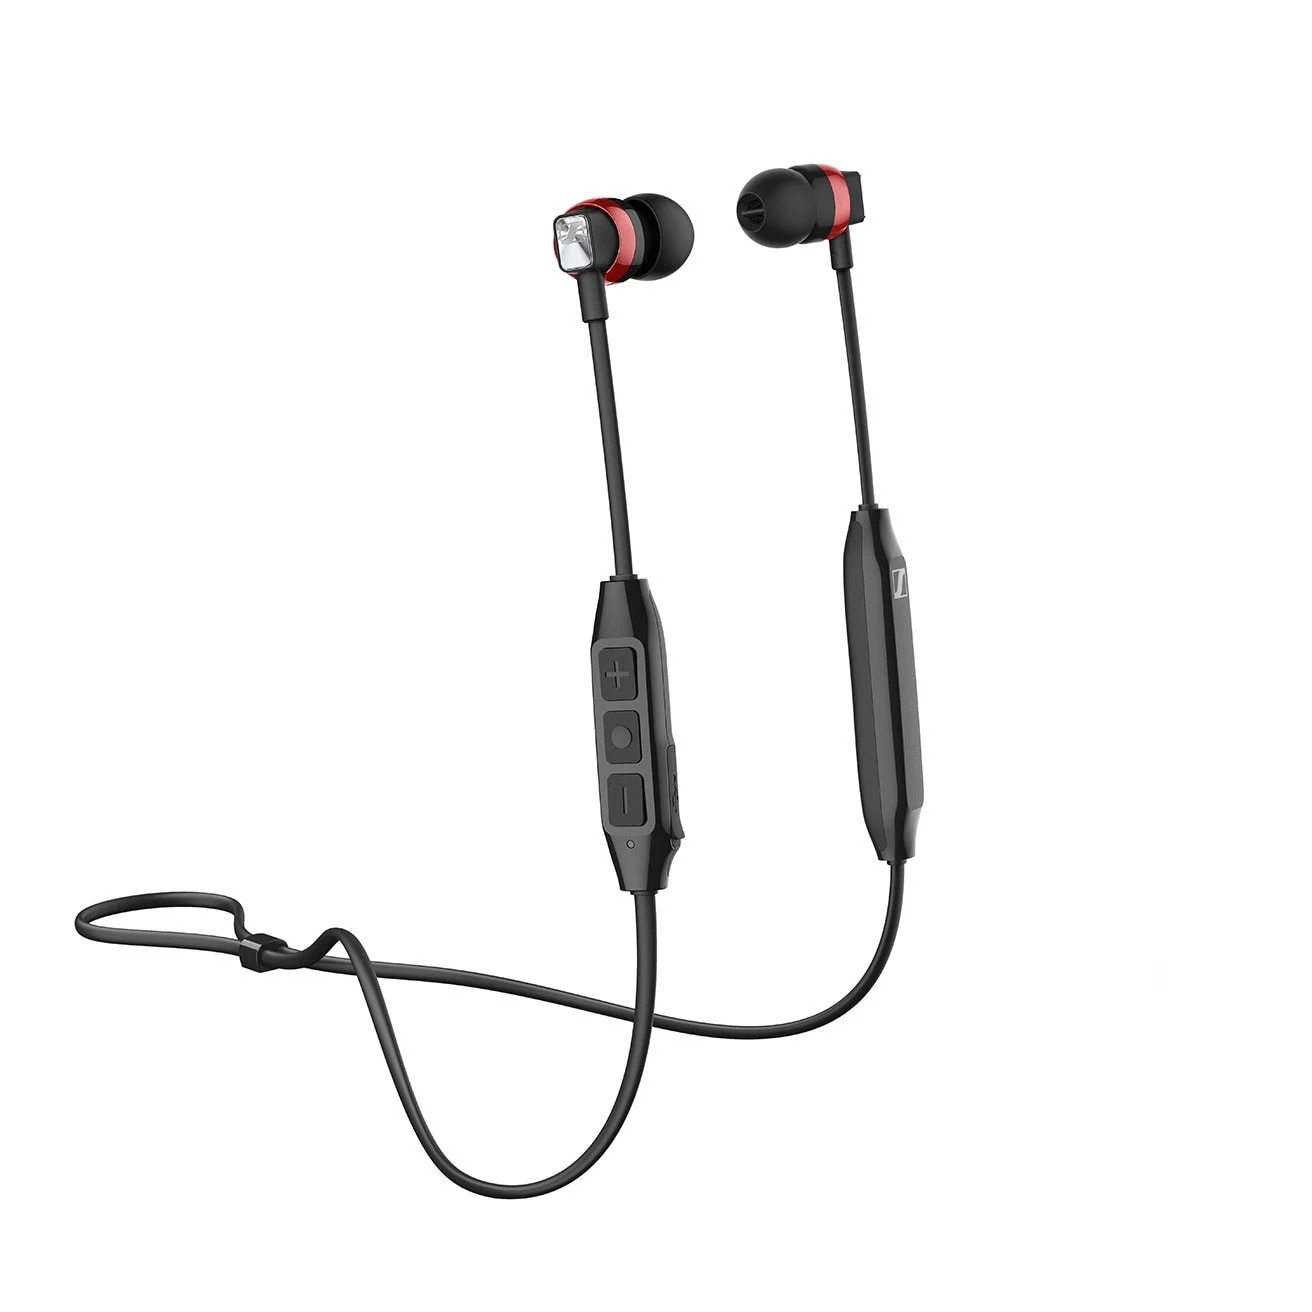 Sennheiser launches HD 250BT headphone and CX 120BT earphone in India:  Price starts ₹3,490